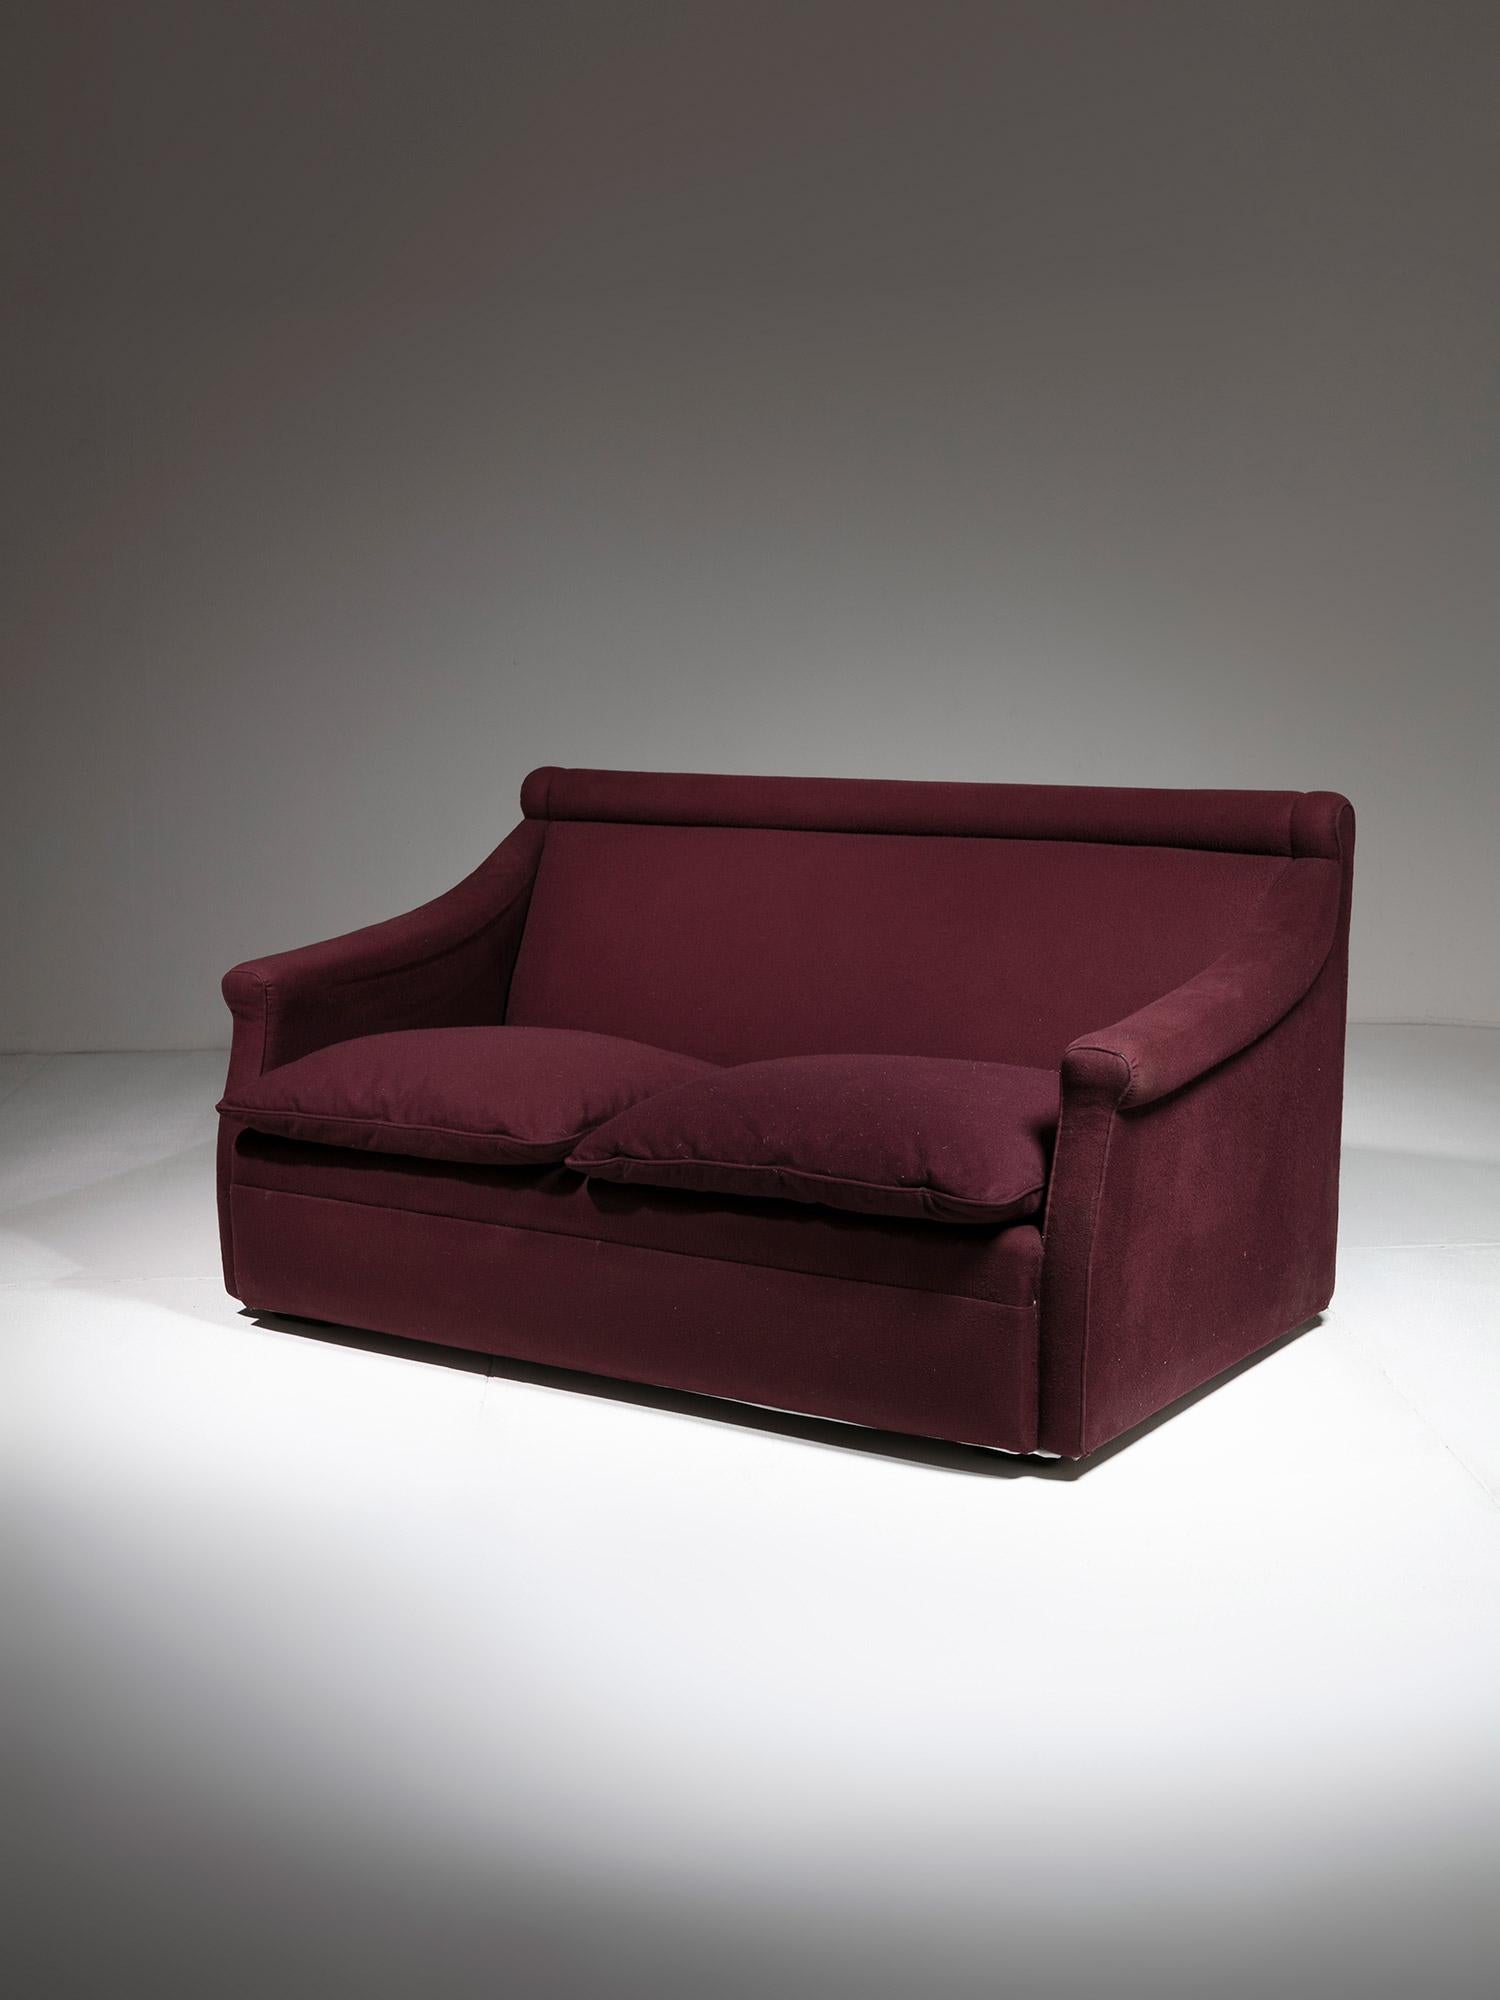 San Siro settee model P16 by Luigi Caccia Dominioni for Azucena.
Original plum felt cover; extremely comfortable seating featuring feather cushions with removable covers.